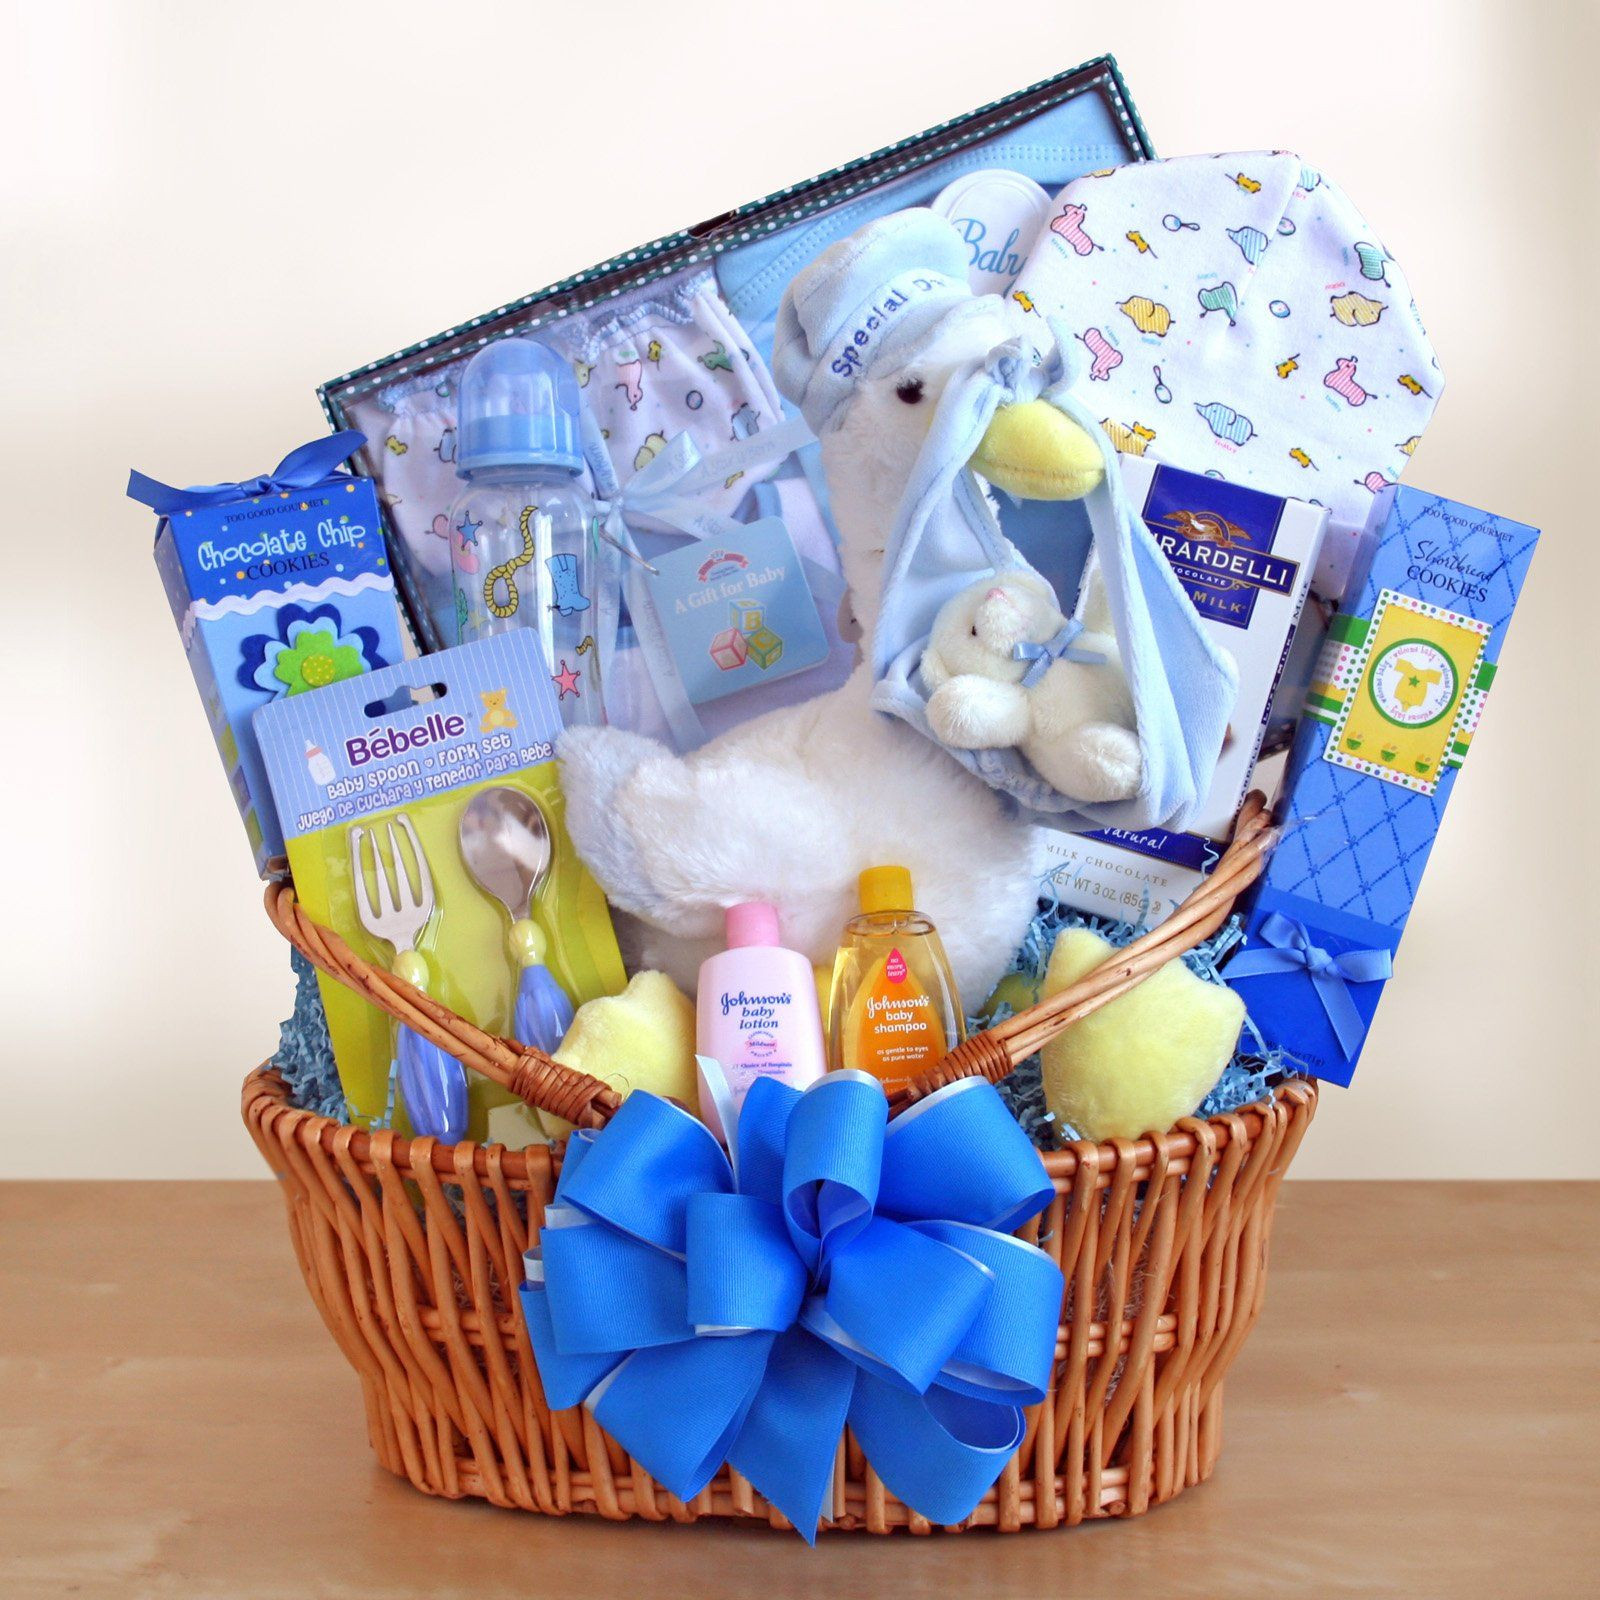 Unique Baby Shower Gift Ideas For Boys
 Special Stork Delivery Baby Boy Gift Basket